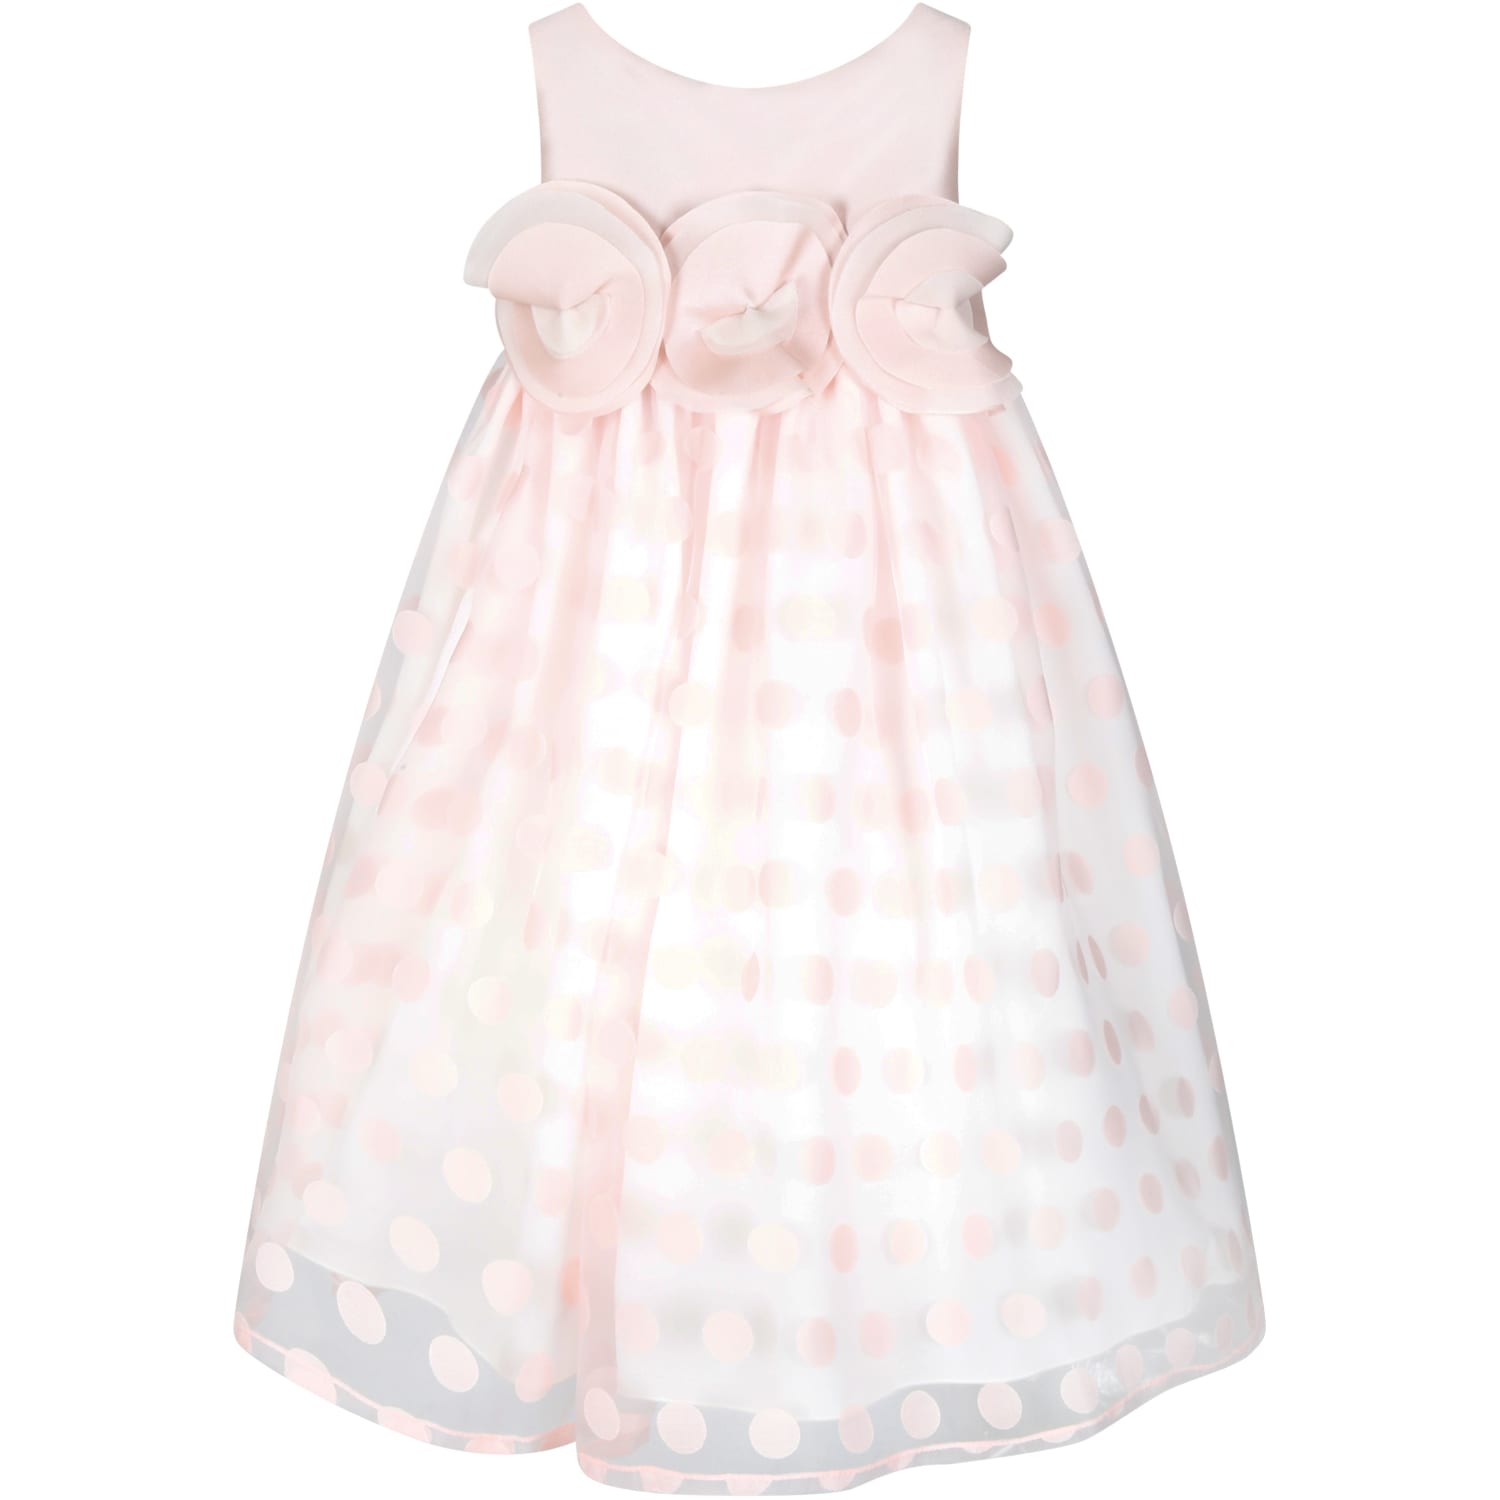 La stupenderia Pink Dress For Girl With Polka-dots